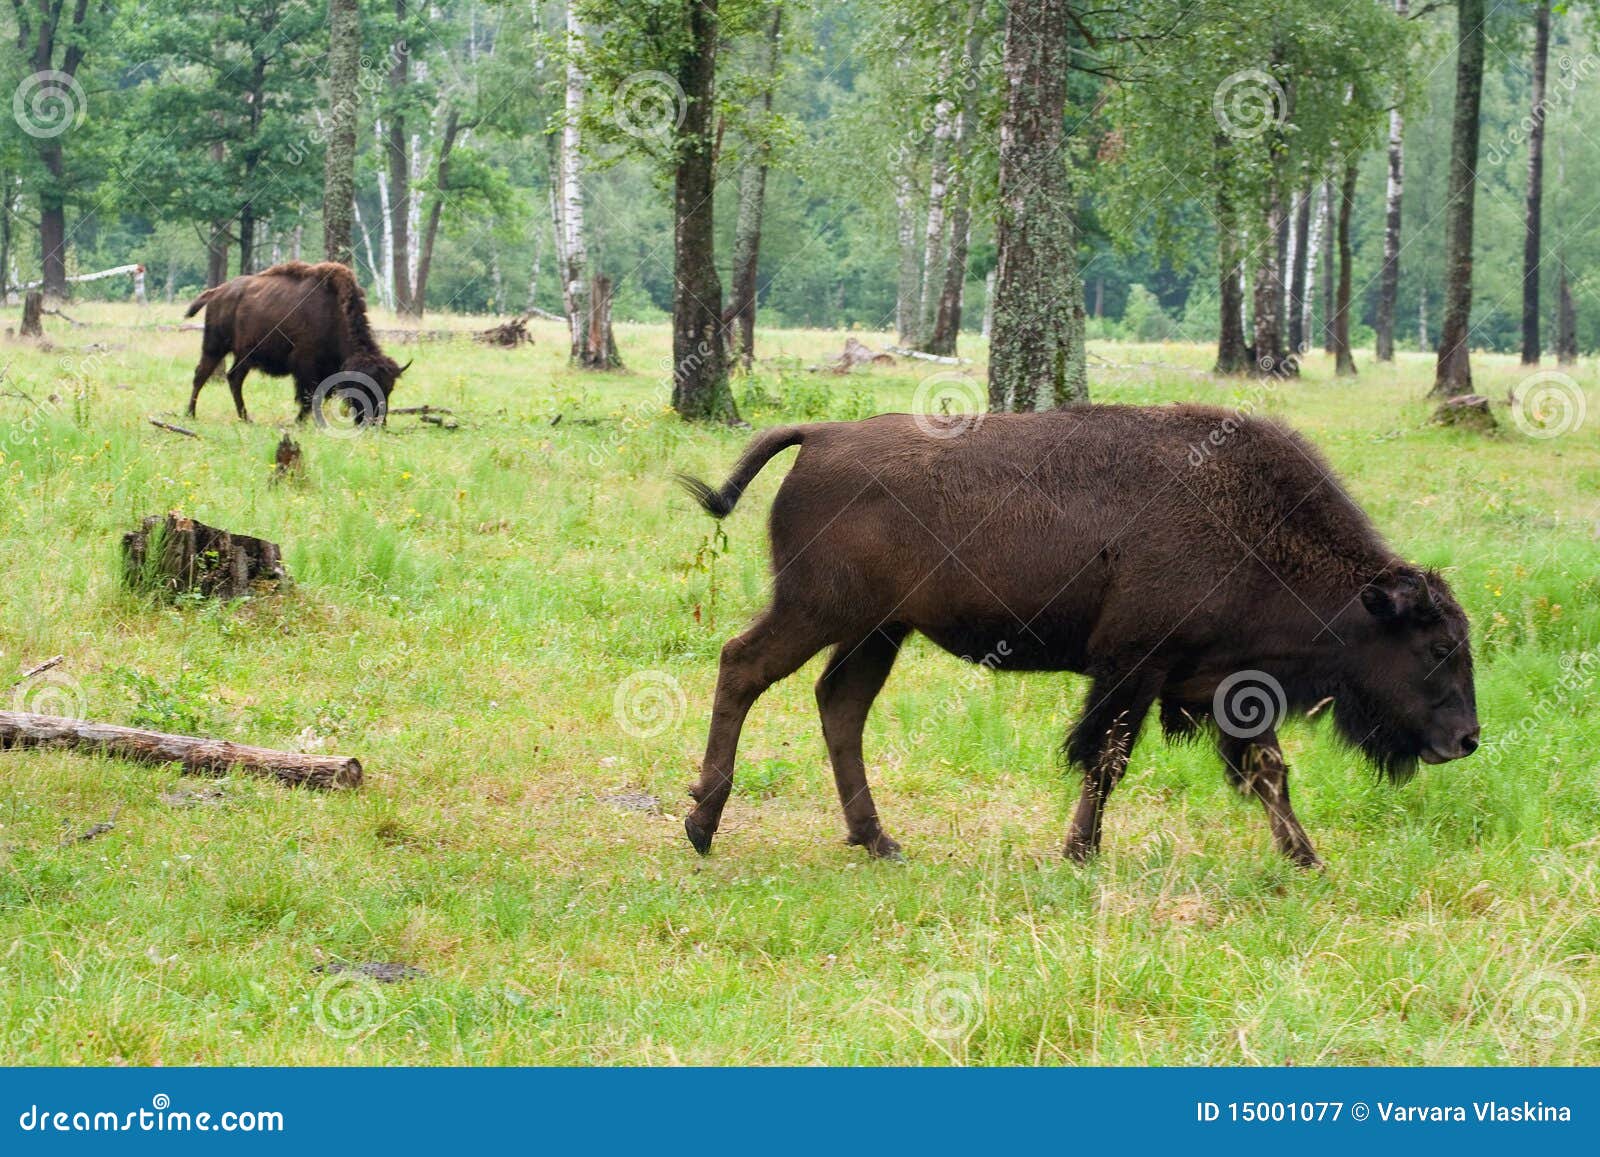 Two Bisons in the Summer Forest Stock Image - Image of wild, wildlife ...